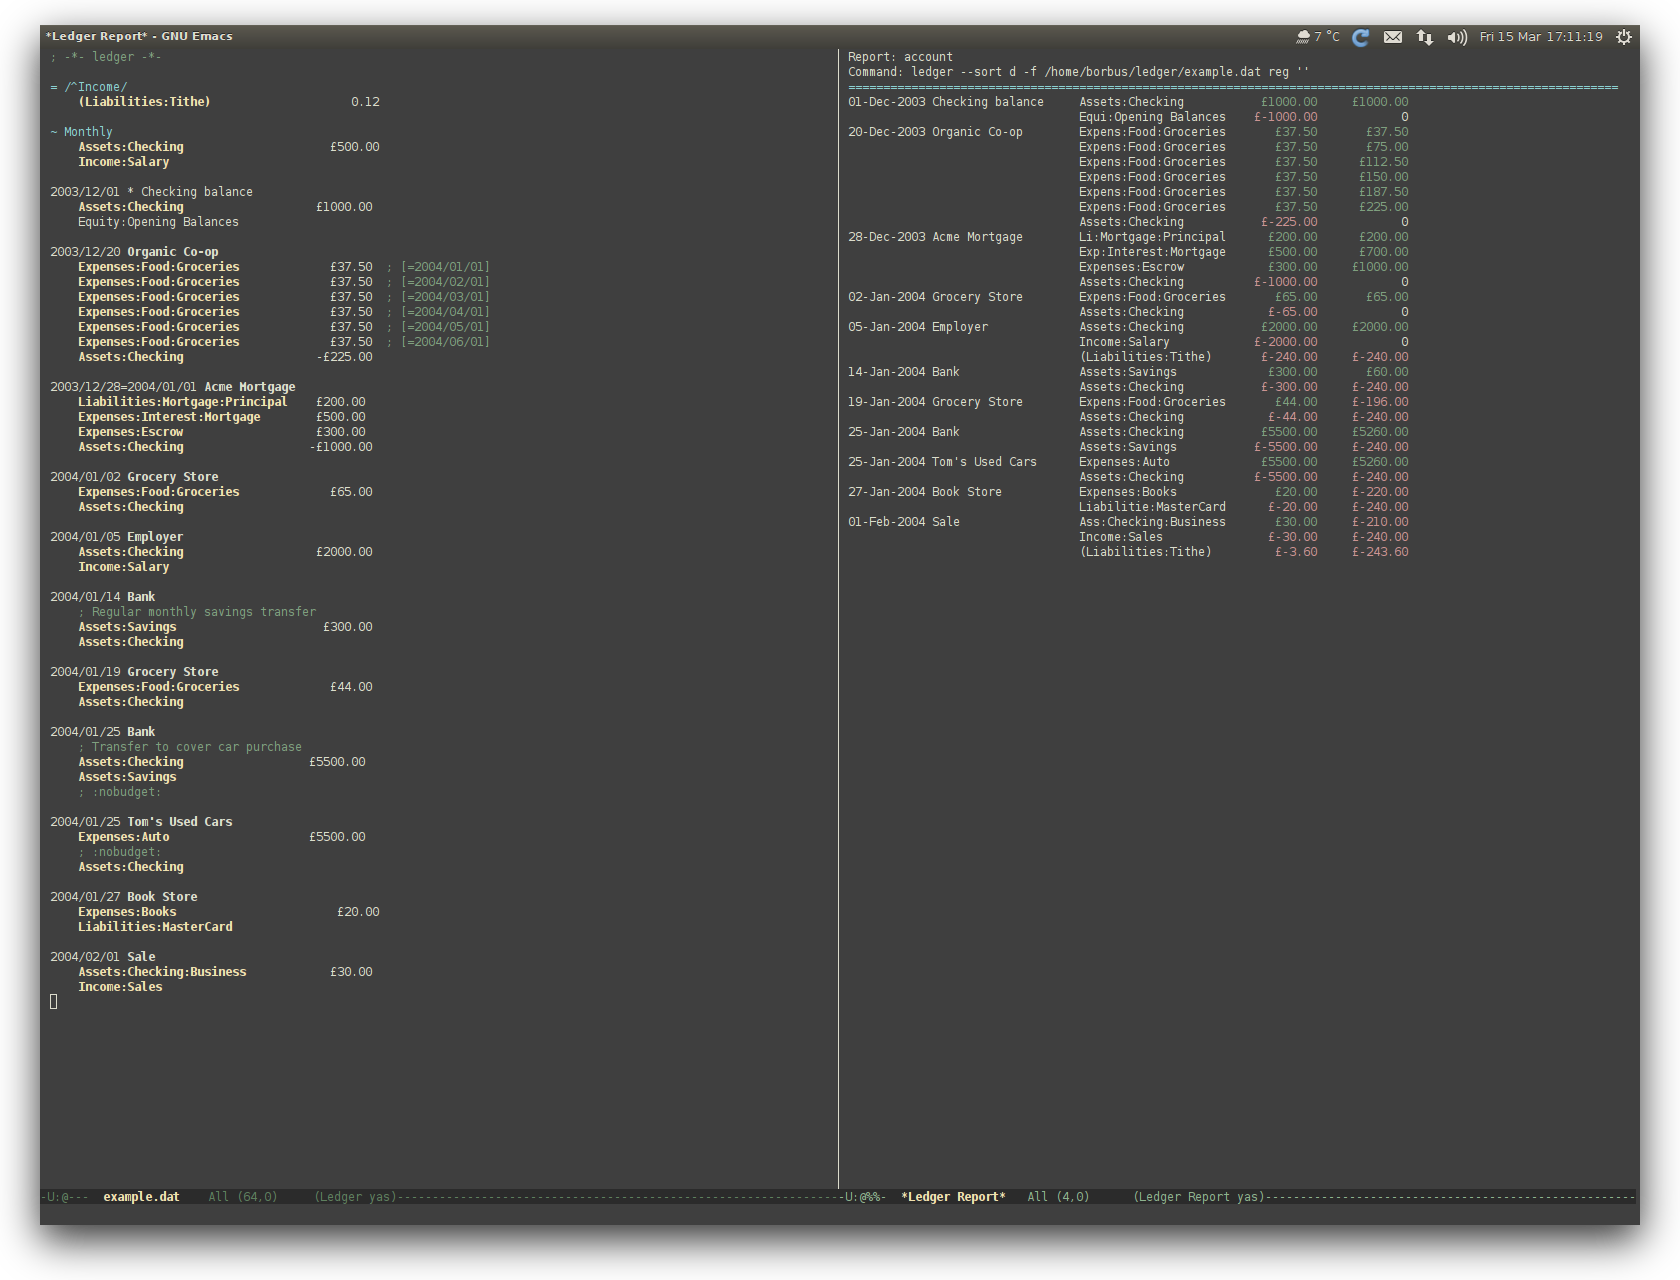 /TakeV/spacemacs/media/commit/0f9743af730ef049b73aa150ce8c6f89a7cae399/layers/finance/img/ledger.png